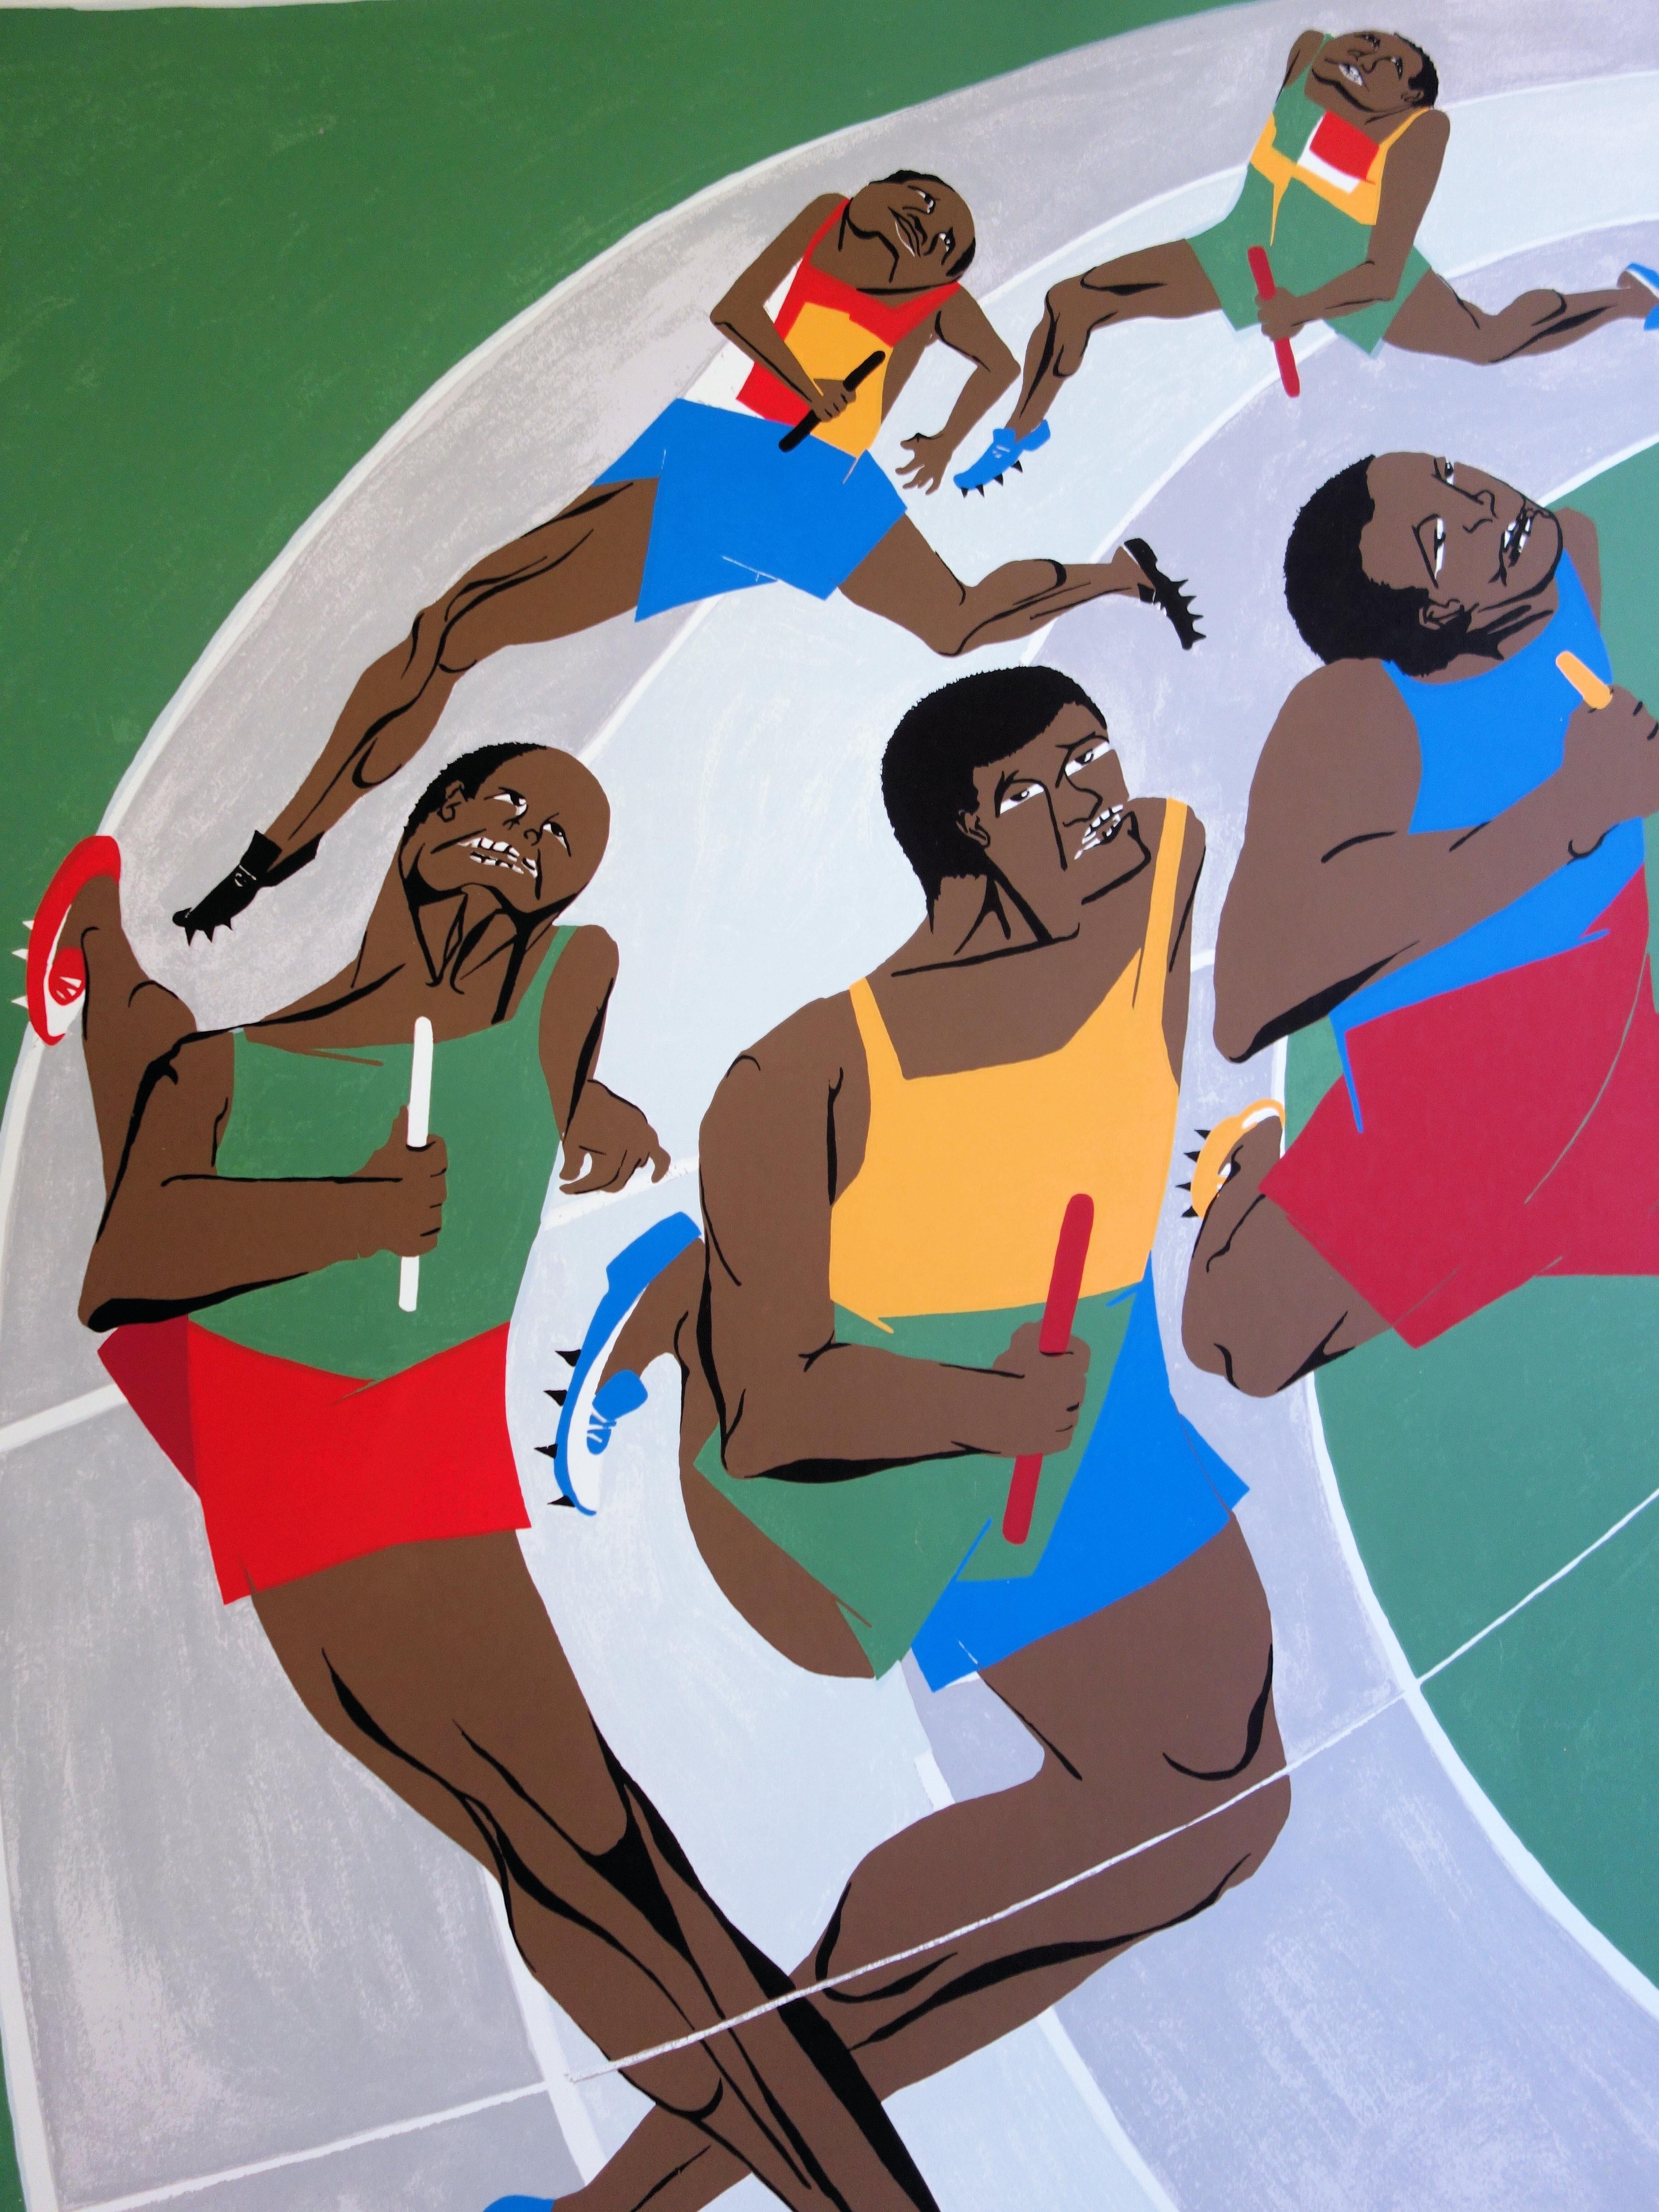 The Relay Race : Passing the Baton - Lithograph (Olympic Games Munich 1972) - Modern Print by Jacob Lawrence